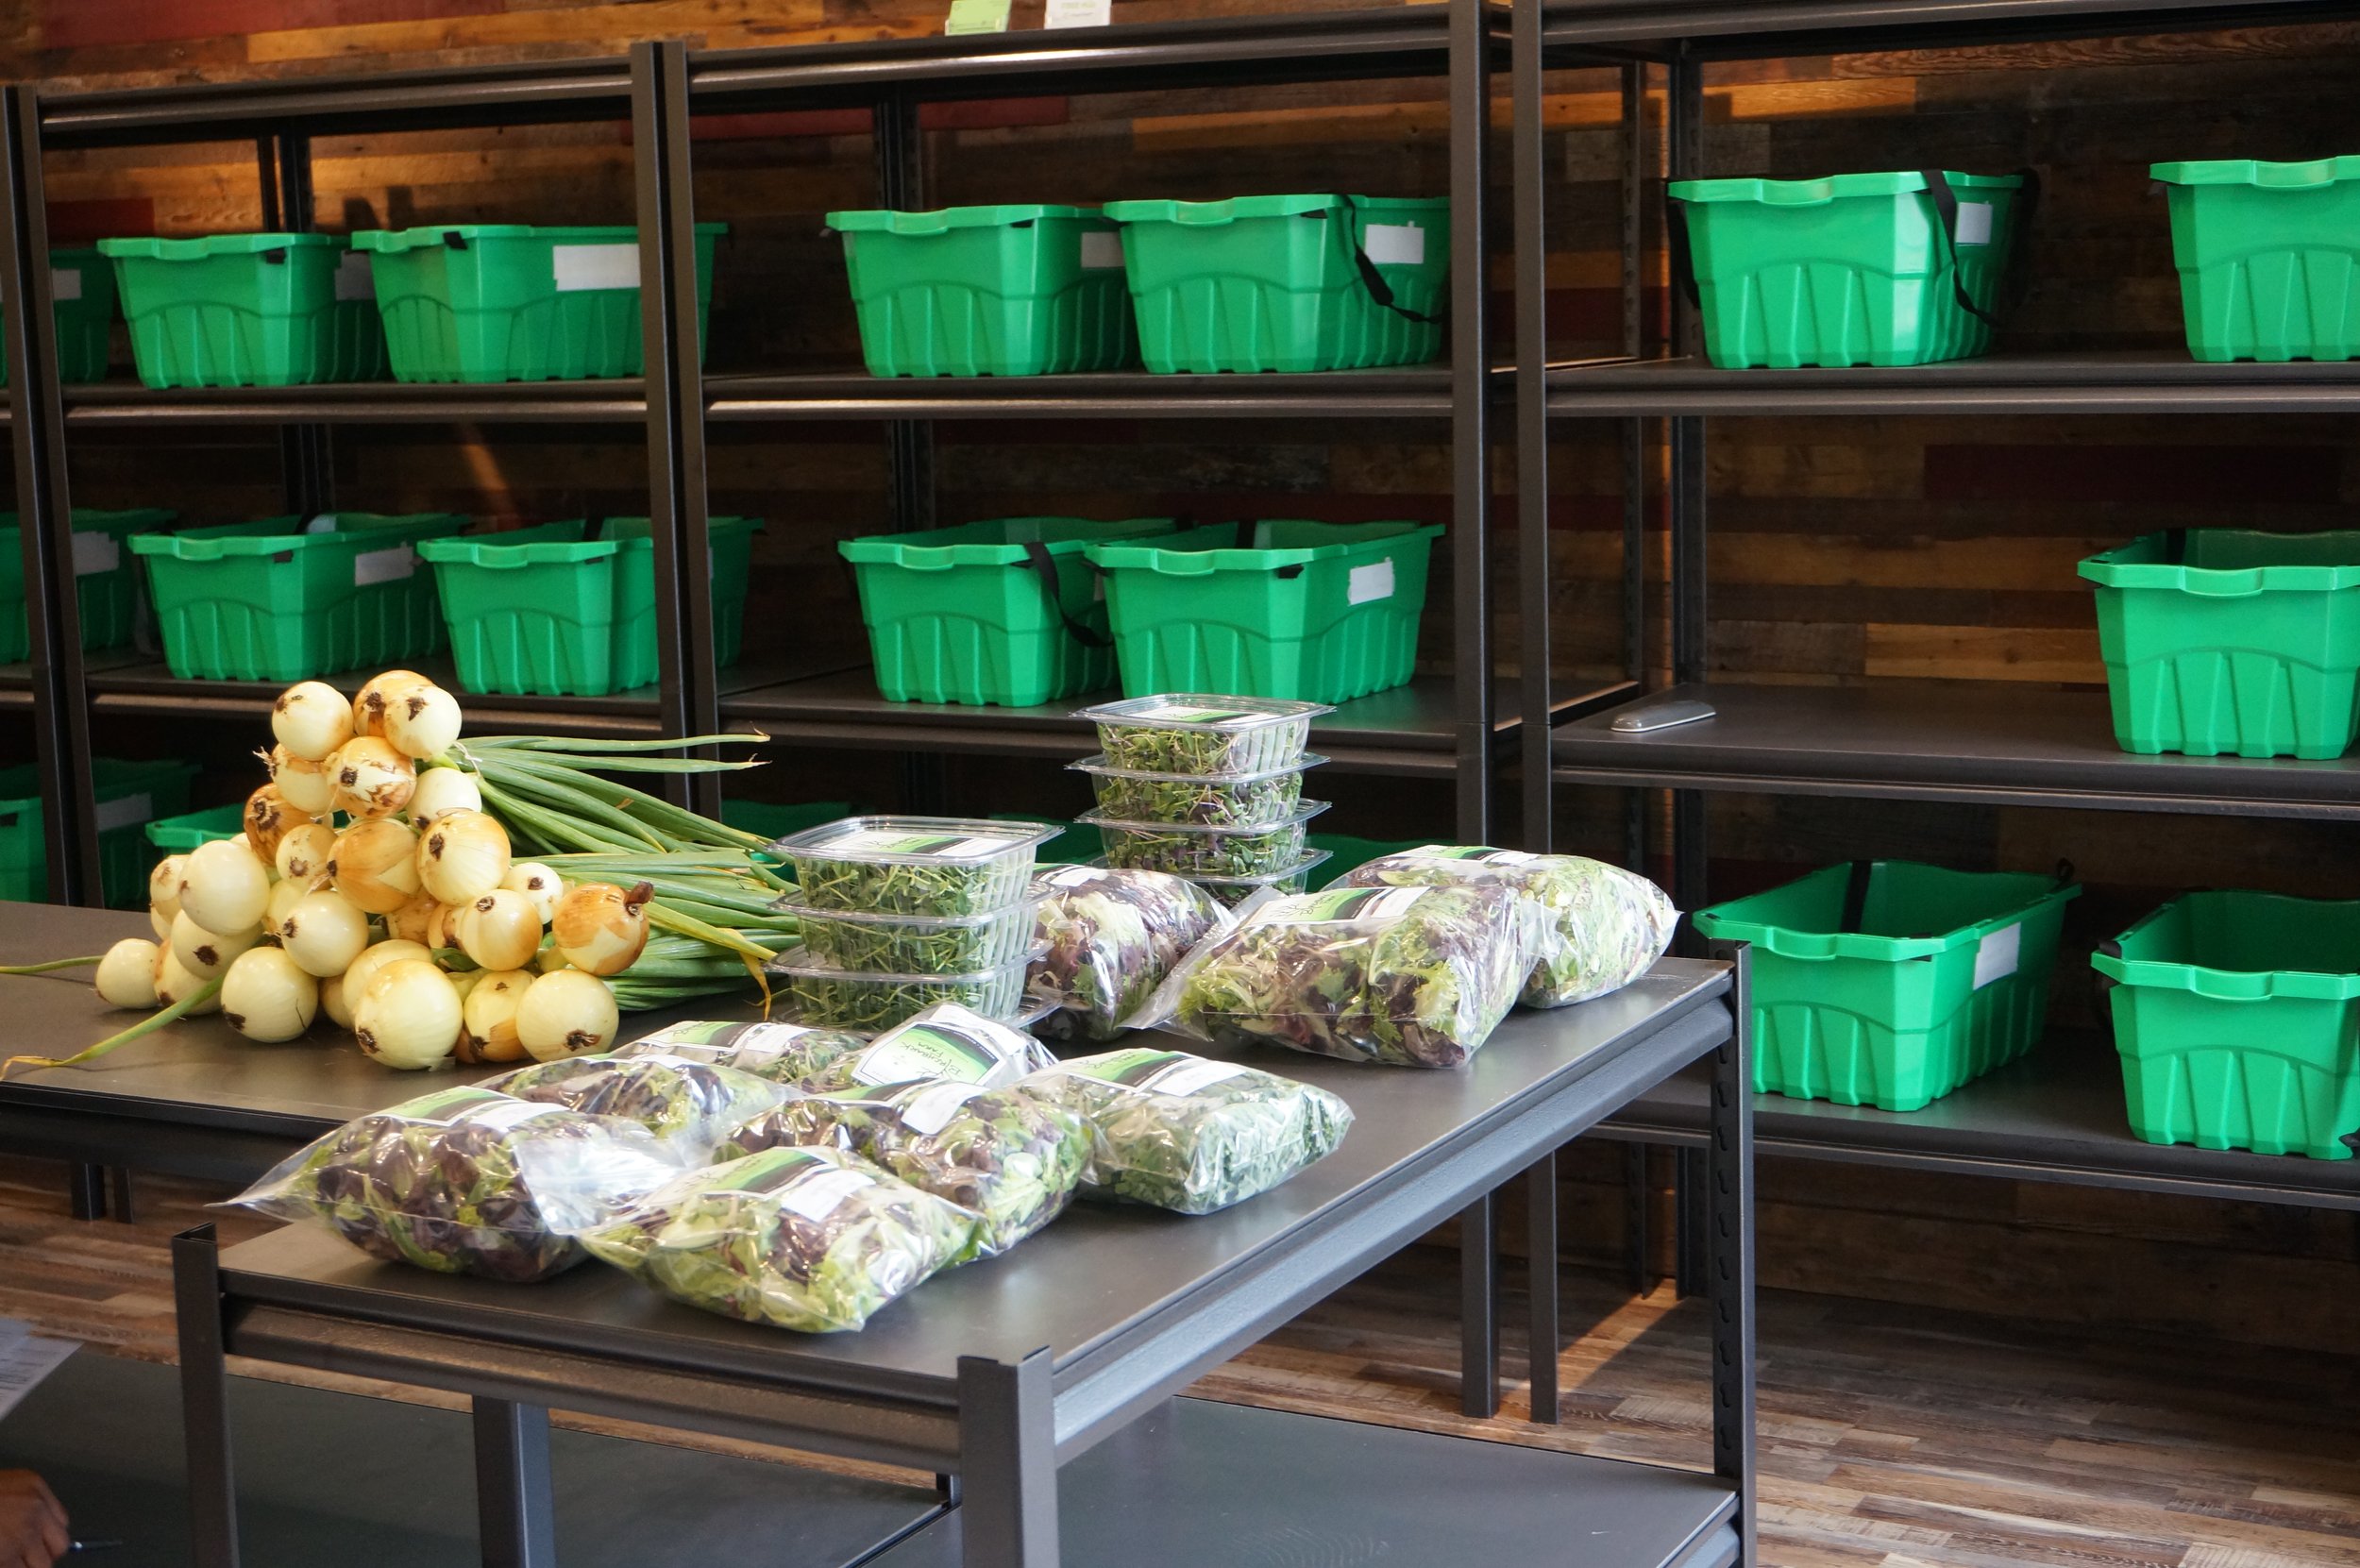  A row of heavy duty shelving against a wood panneled wall, containing two green plastic bins per shelf. On a countertop in front, bagged greens and bunched yellow onions. 